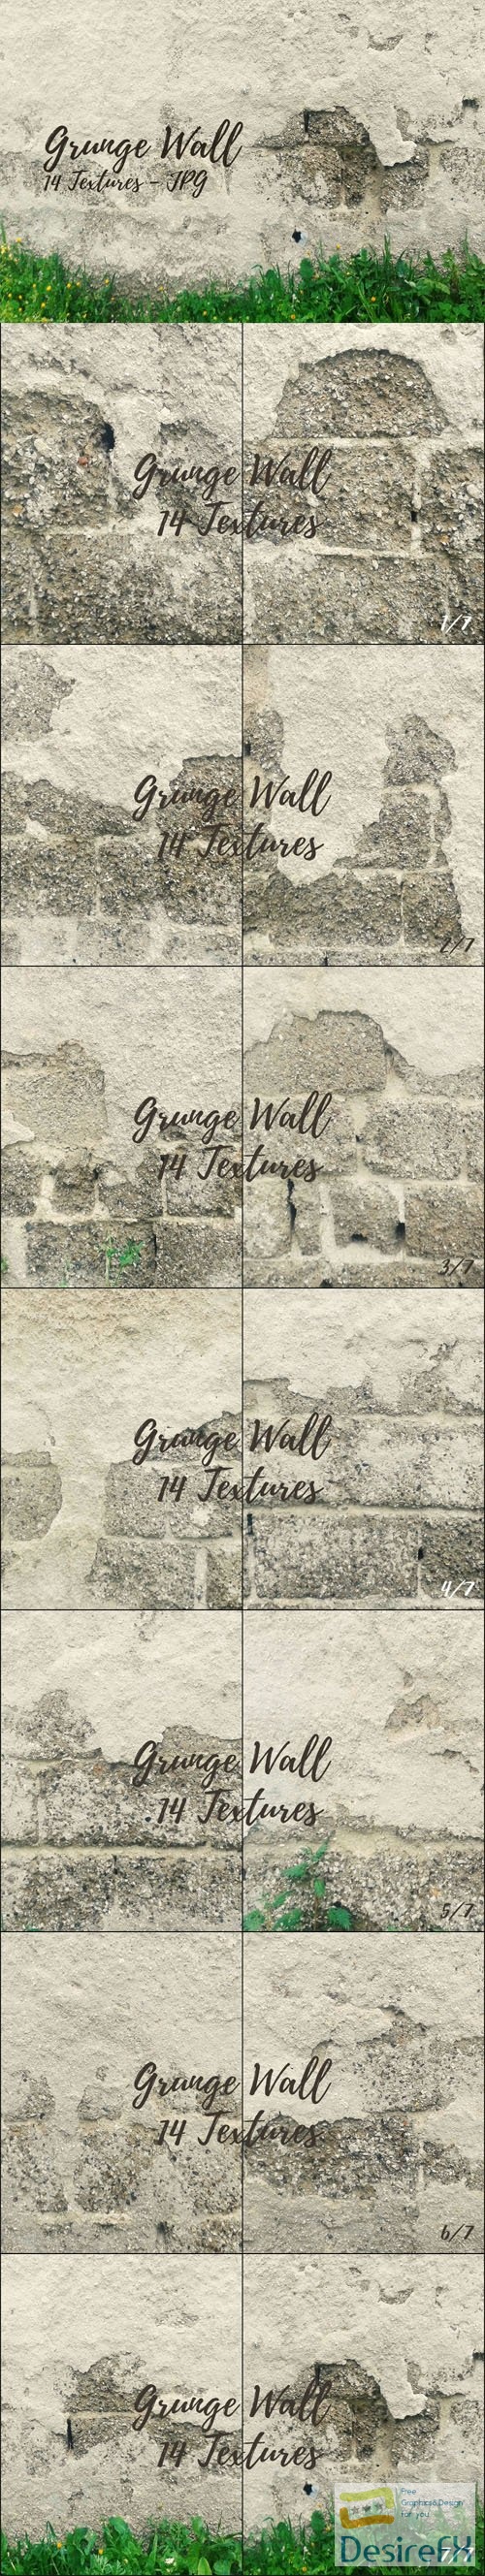 14 Grunge Stuccoed Wall Background Textures